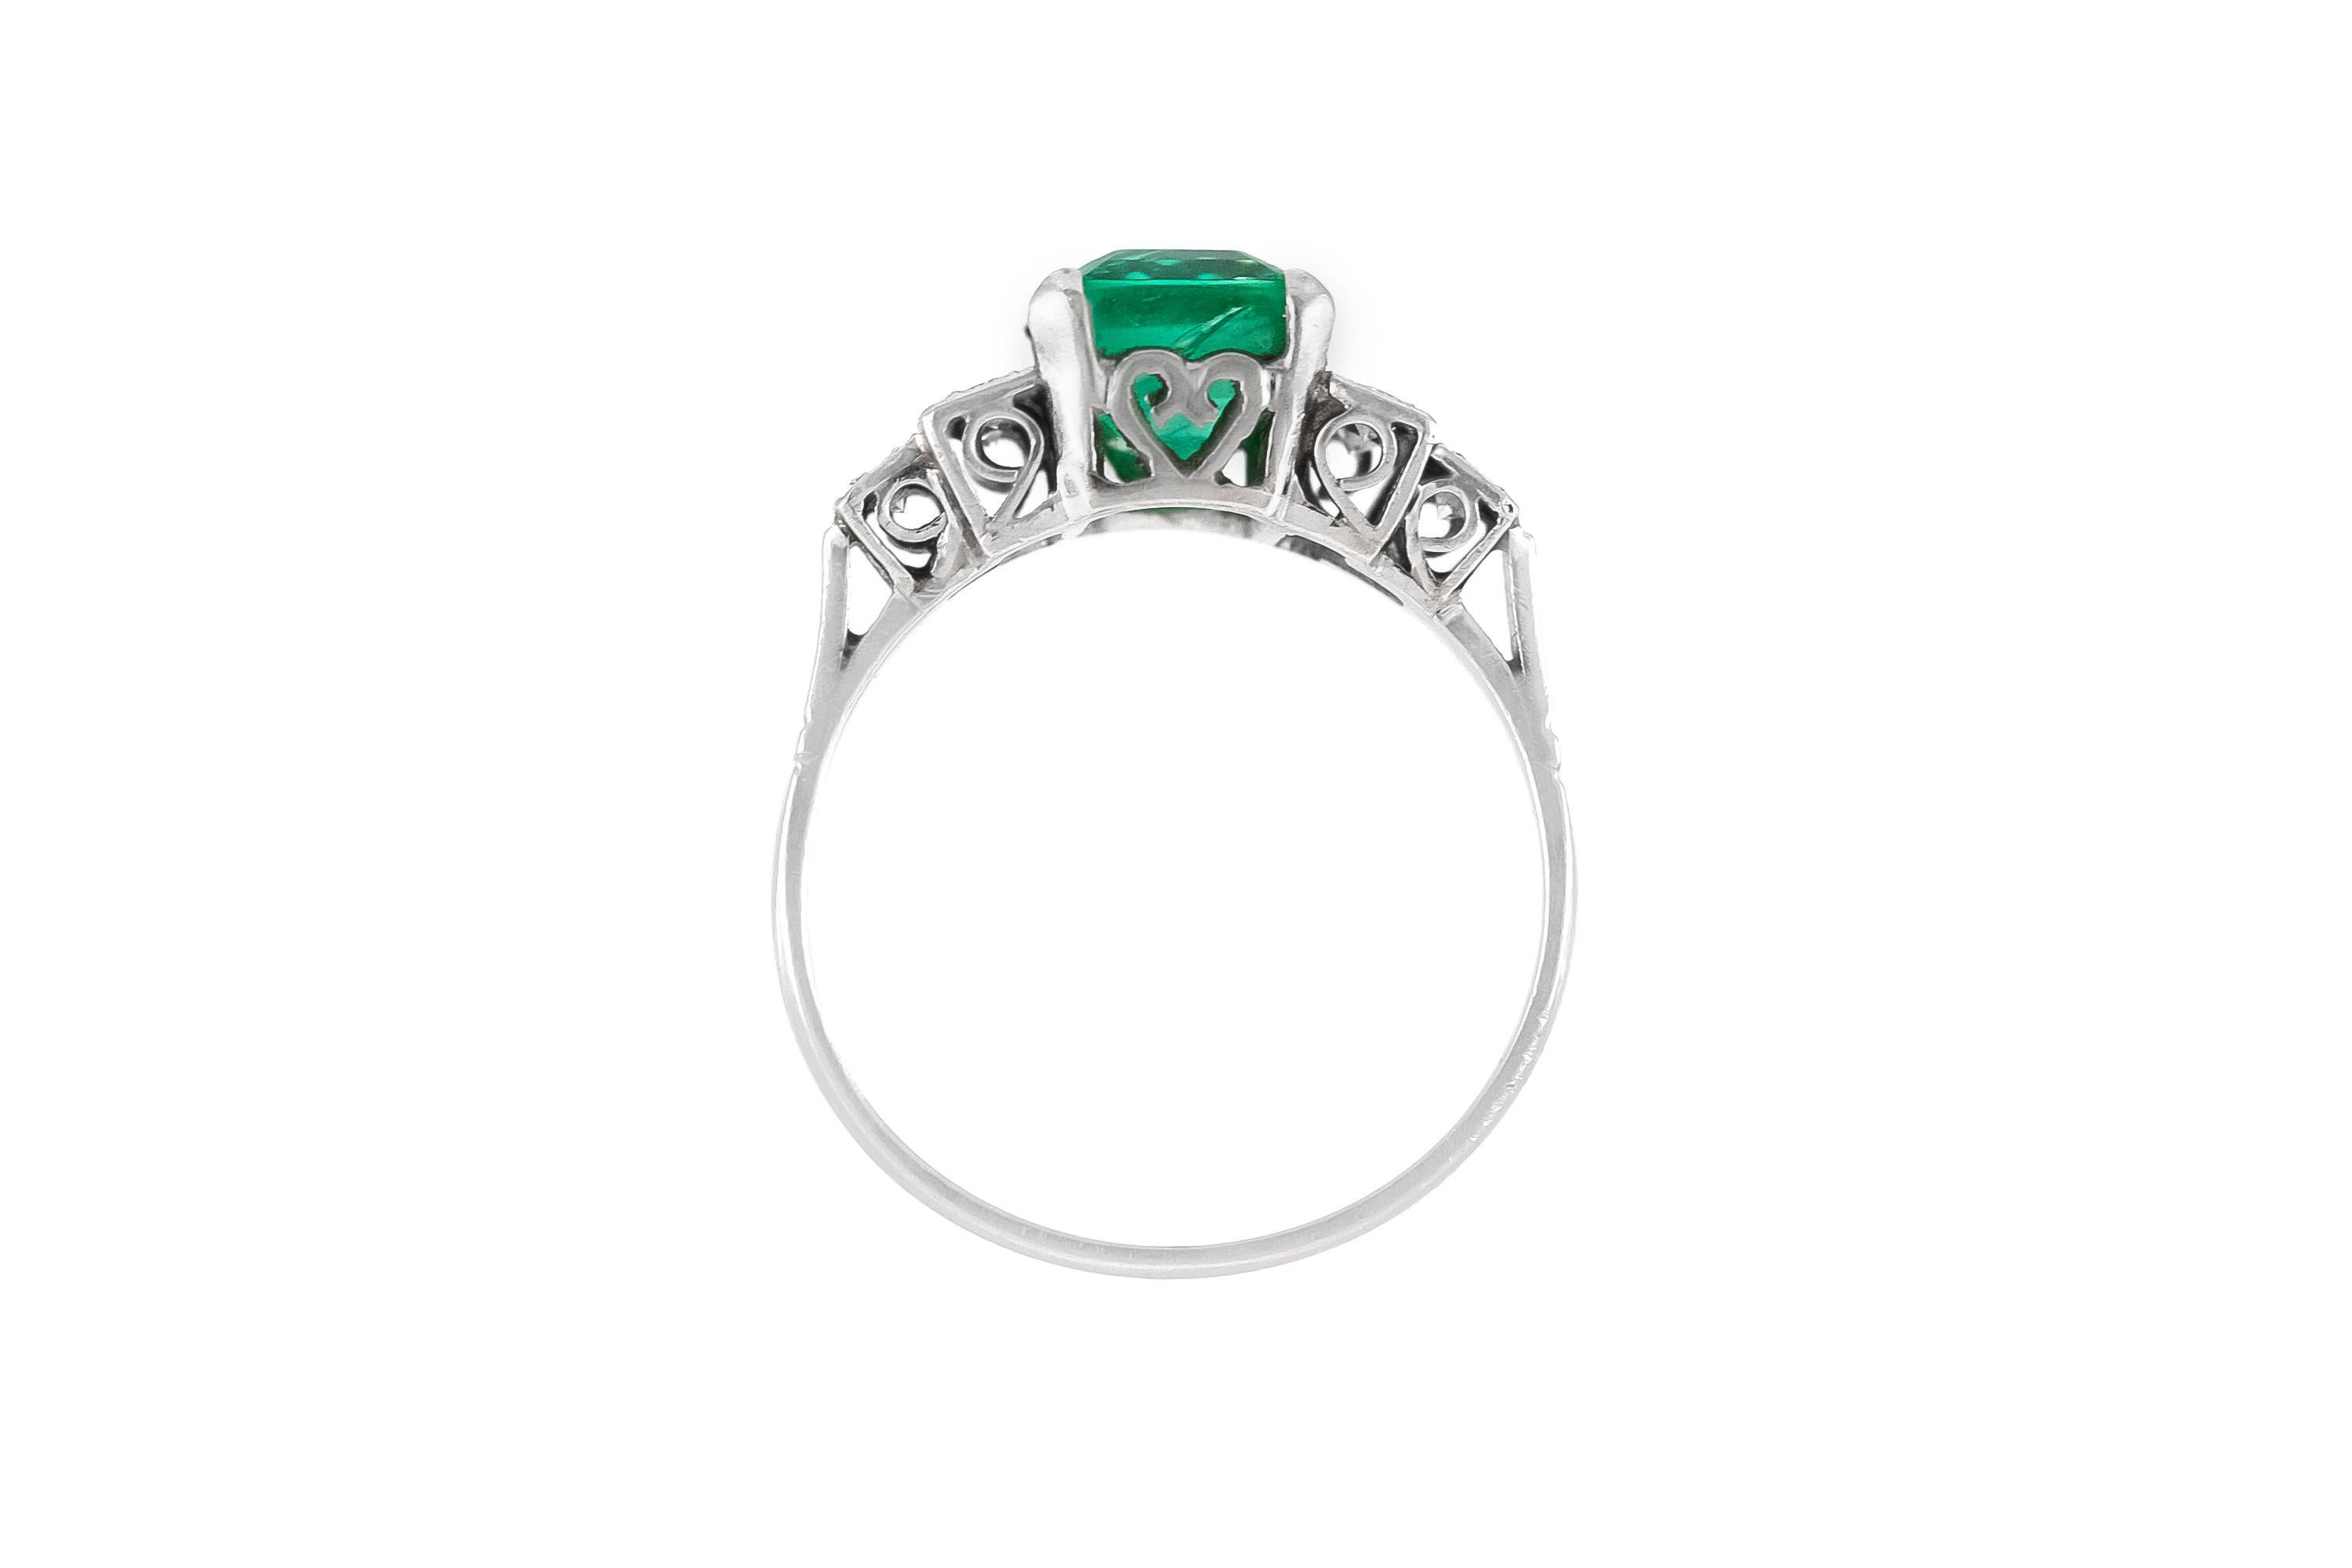 the ring is finely crafted in platinum with center stone emerald weighing approximately total of 1.20 carat and diamonds weighing approximately total of 0.30 carat.
Circa 1930.
